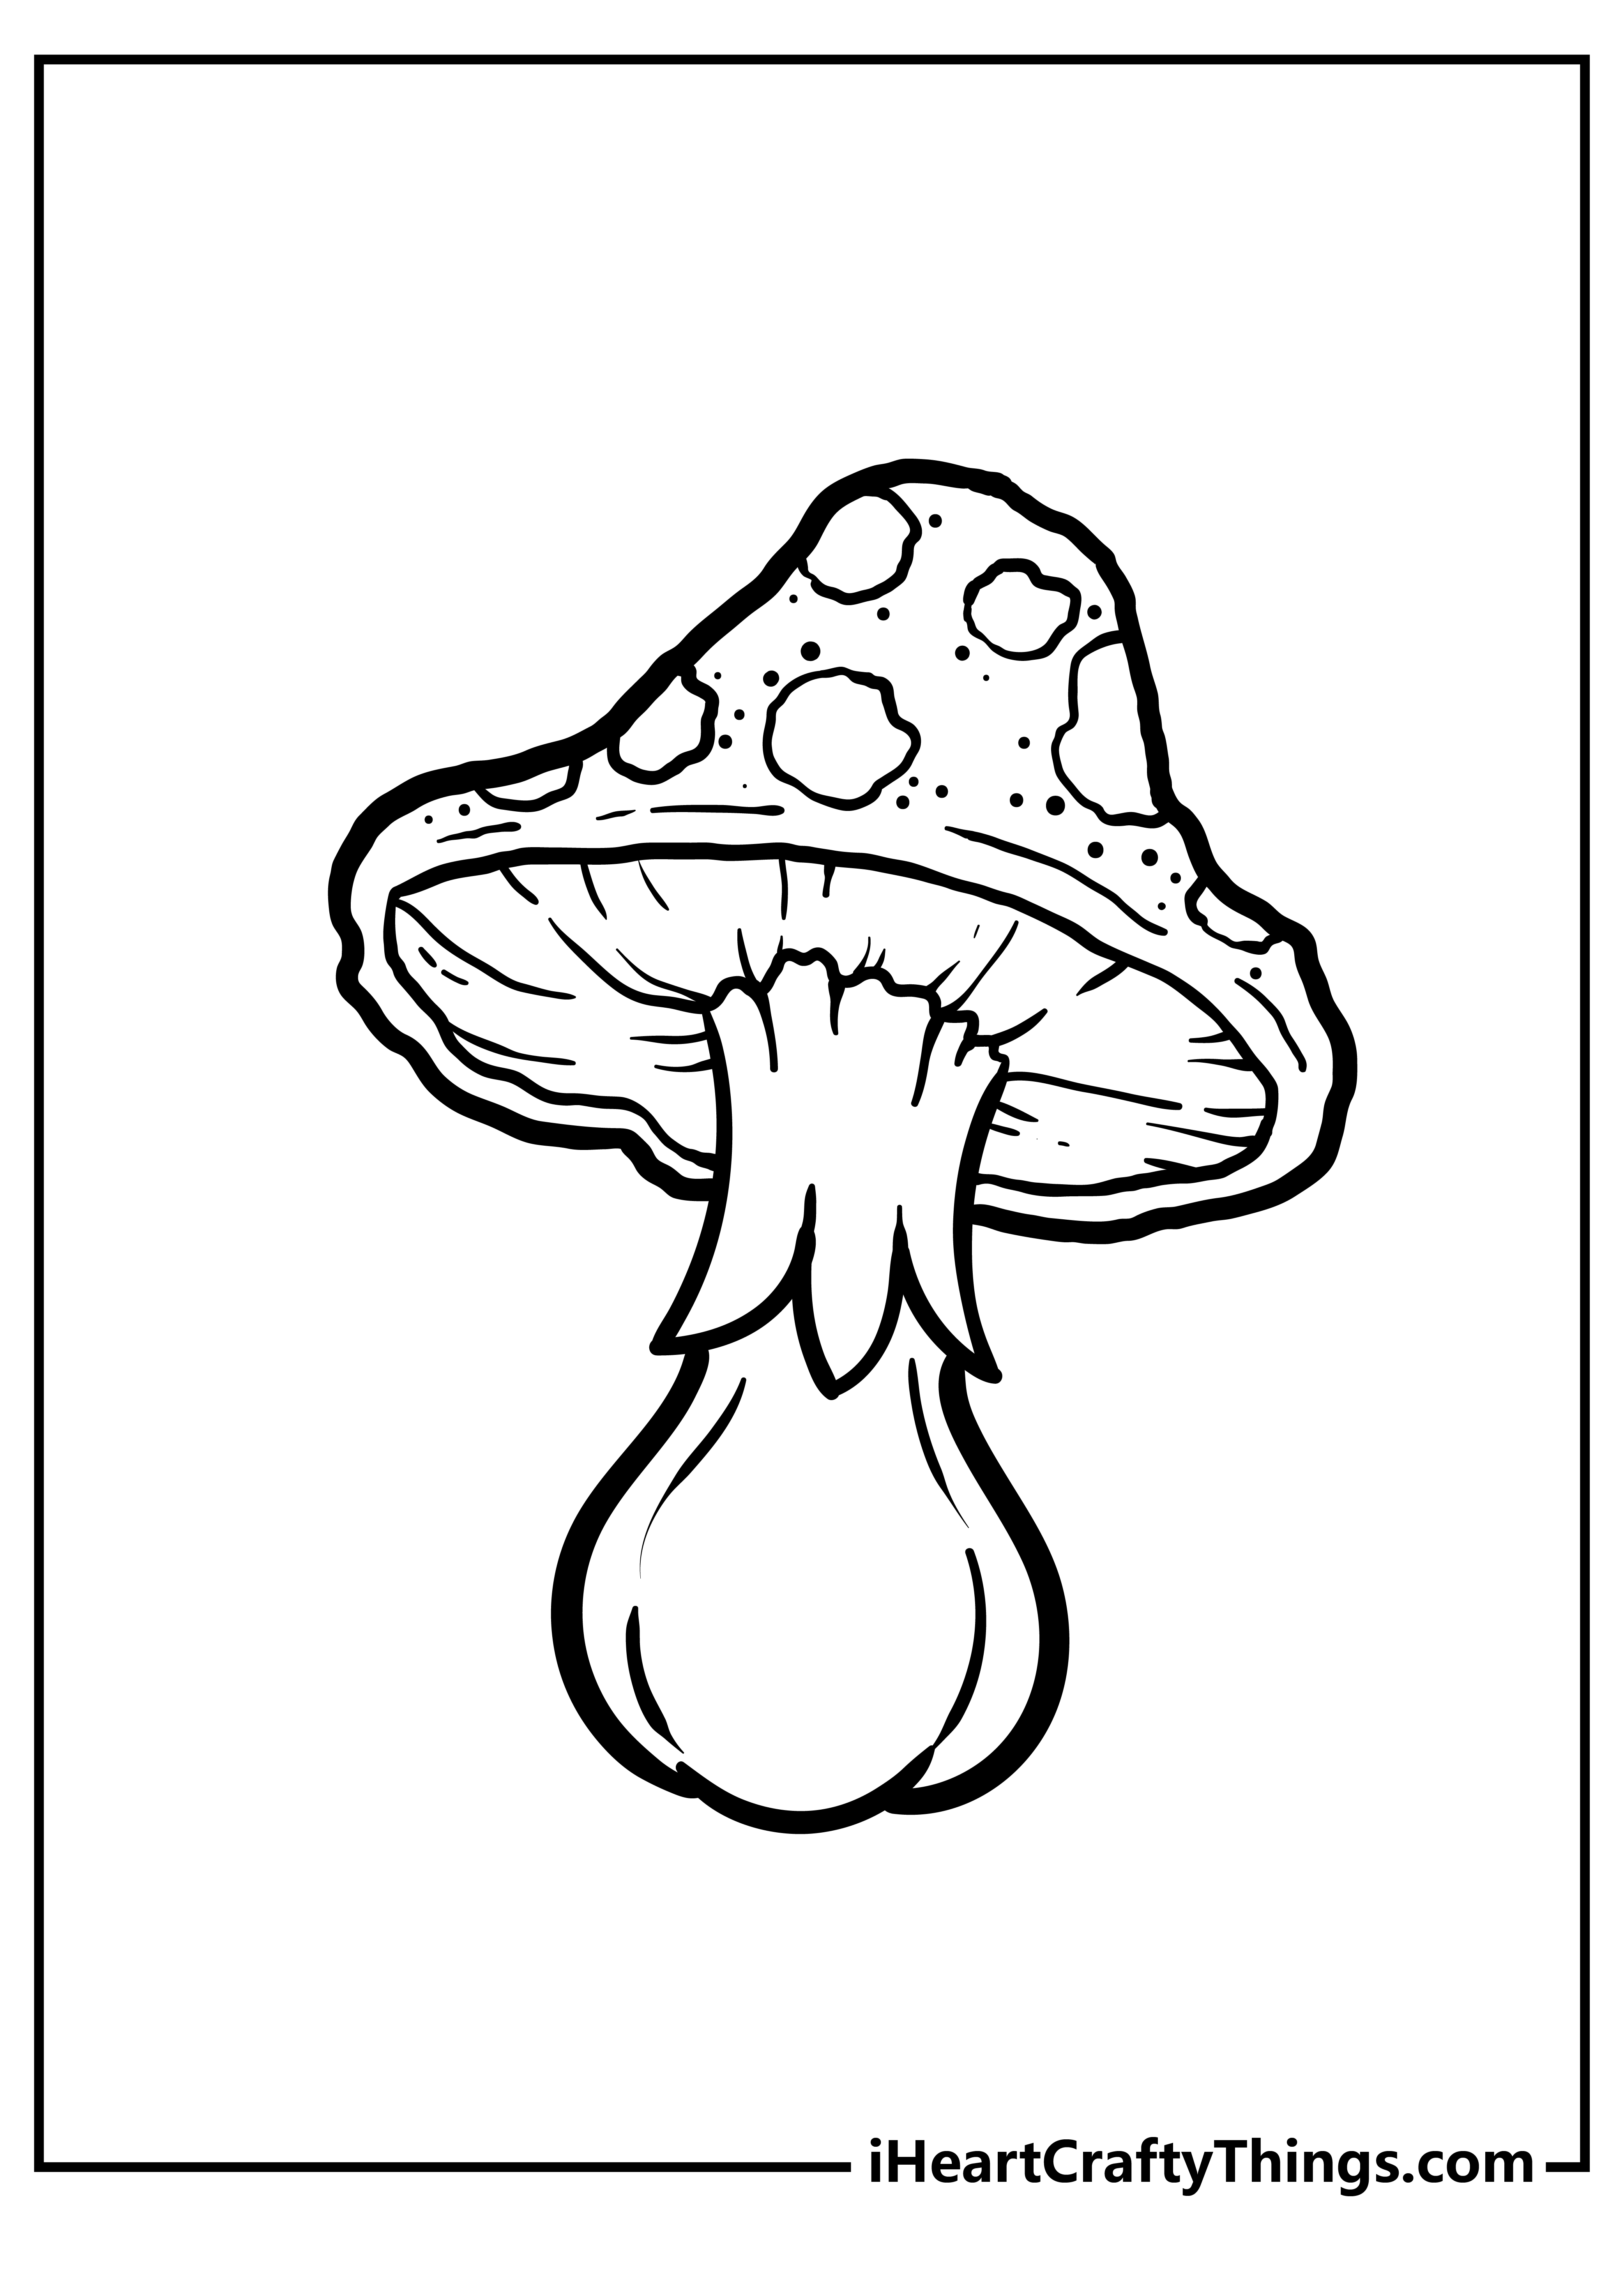 Mushroom Coloring Book for adults free download